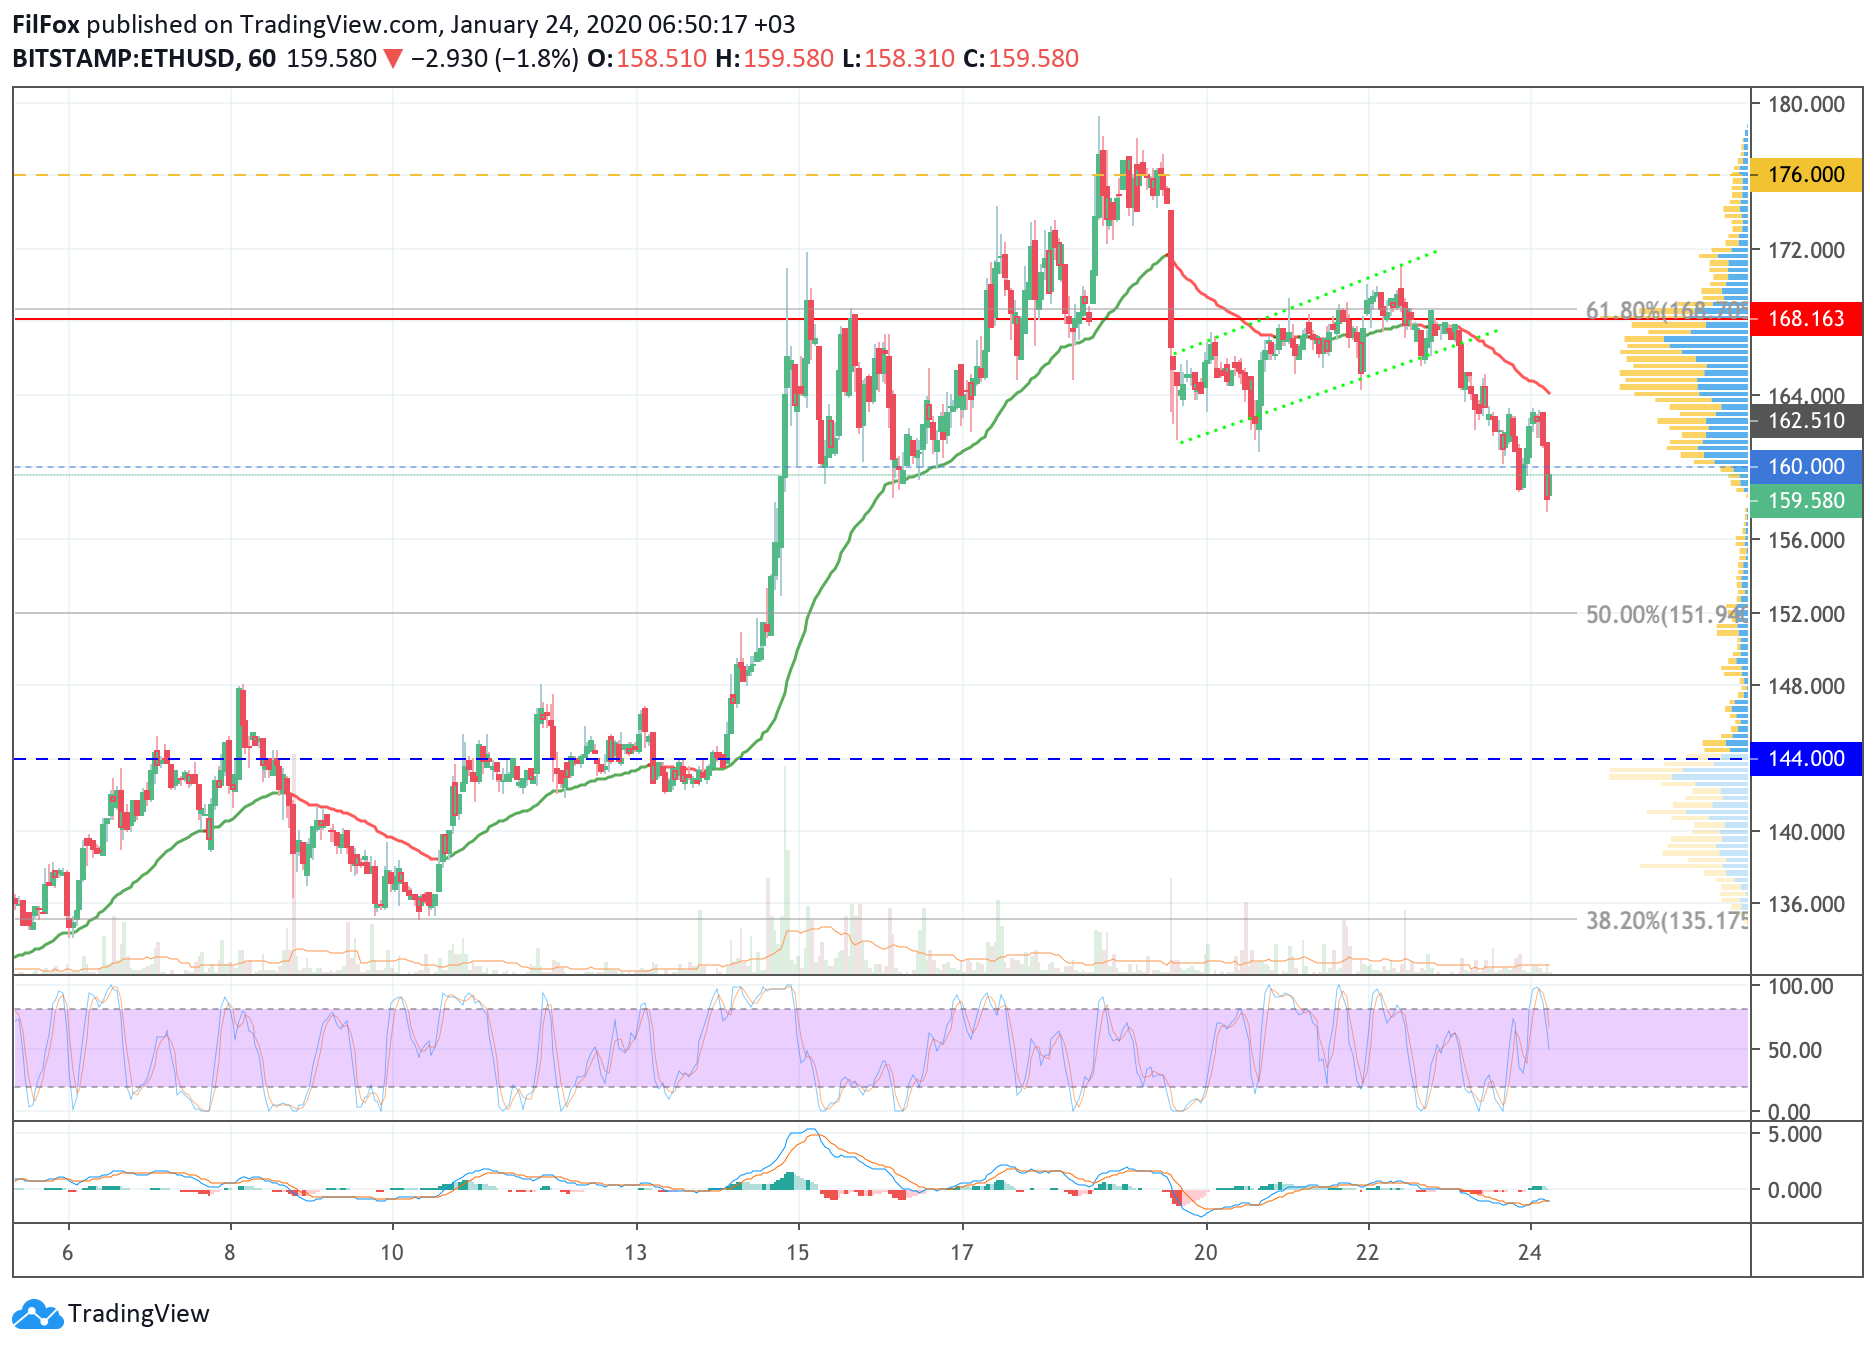 Analysis of cryptocurrency pairs BTC / USD, ETH / USD and XRP / USD on 01.24.2020